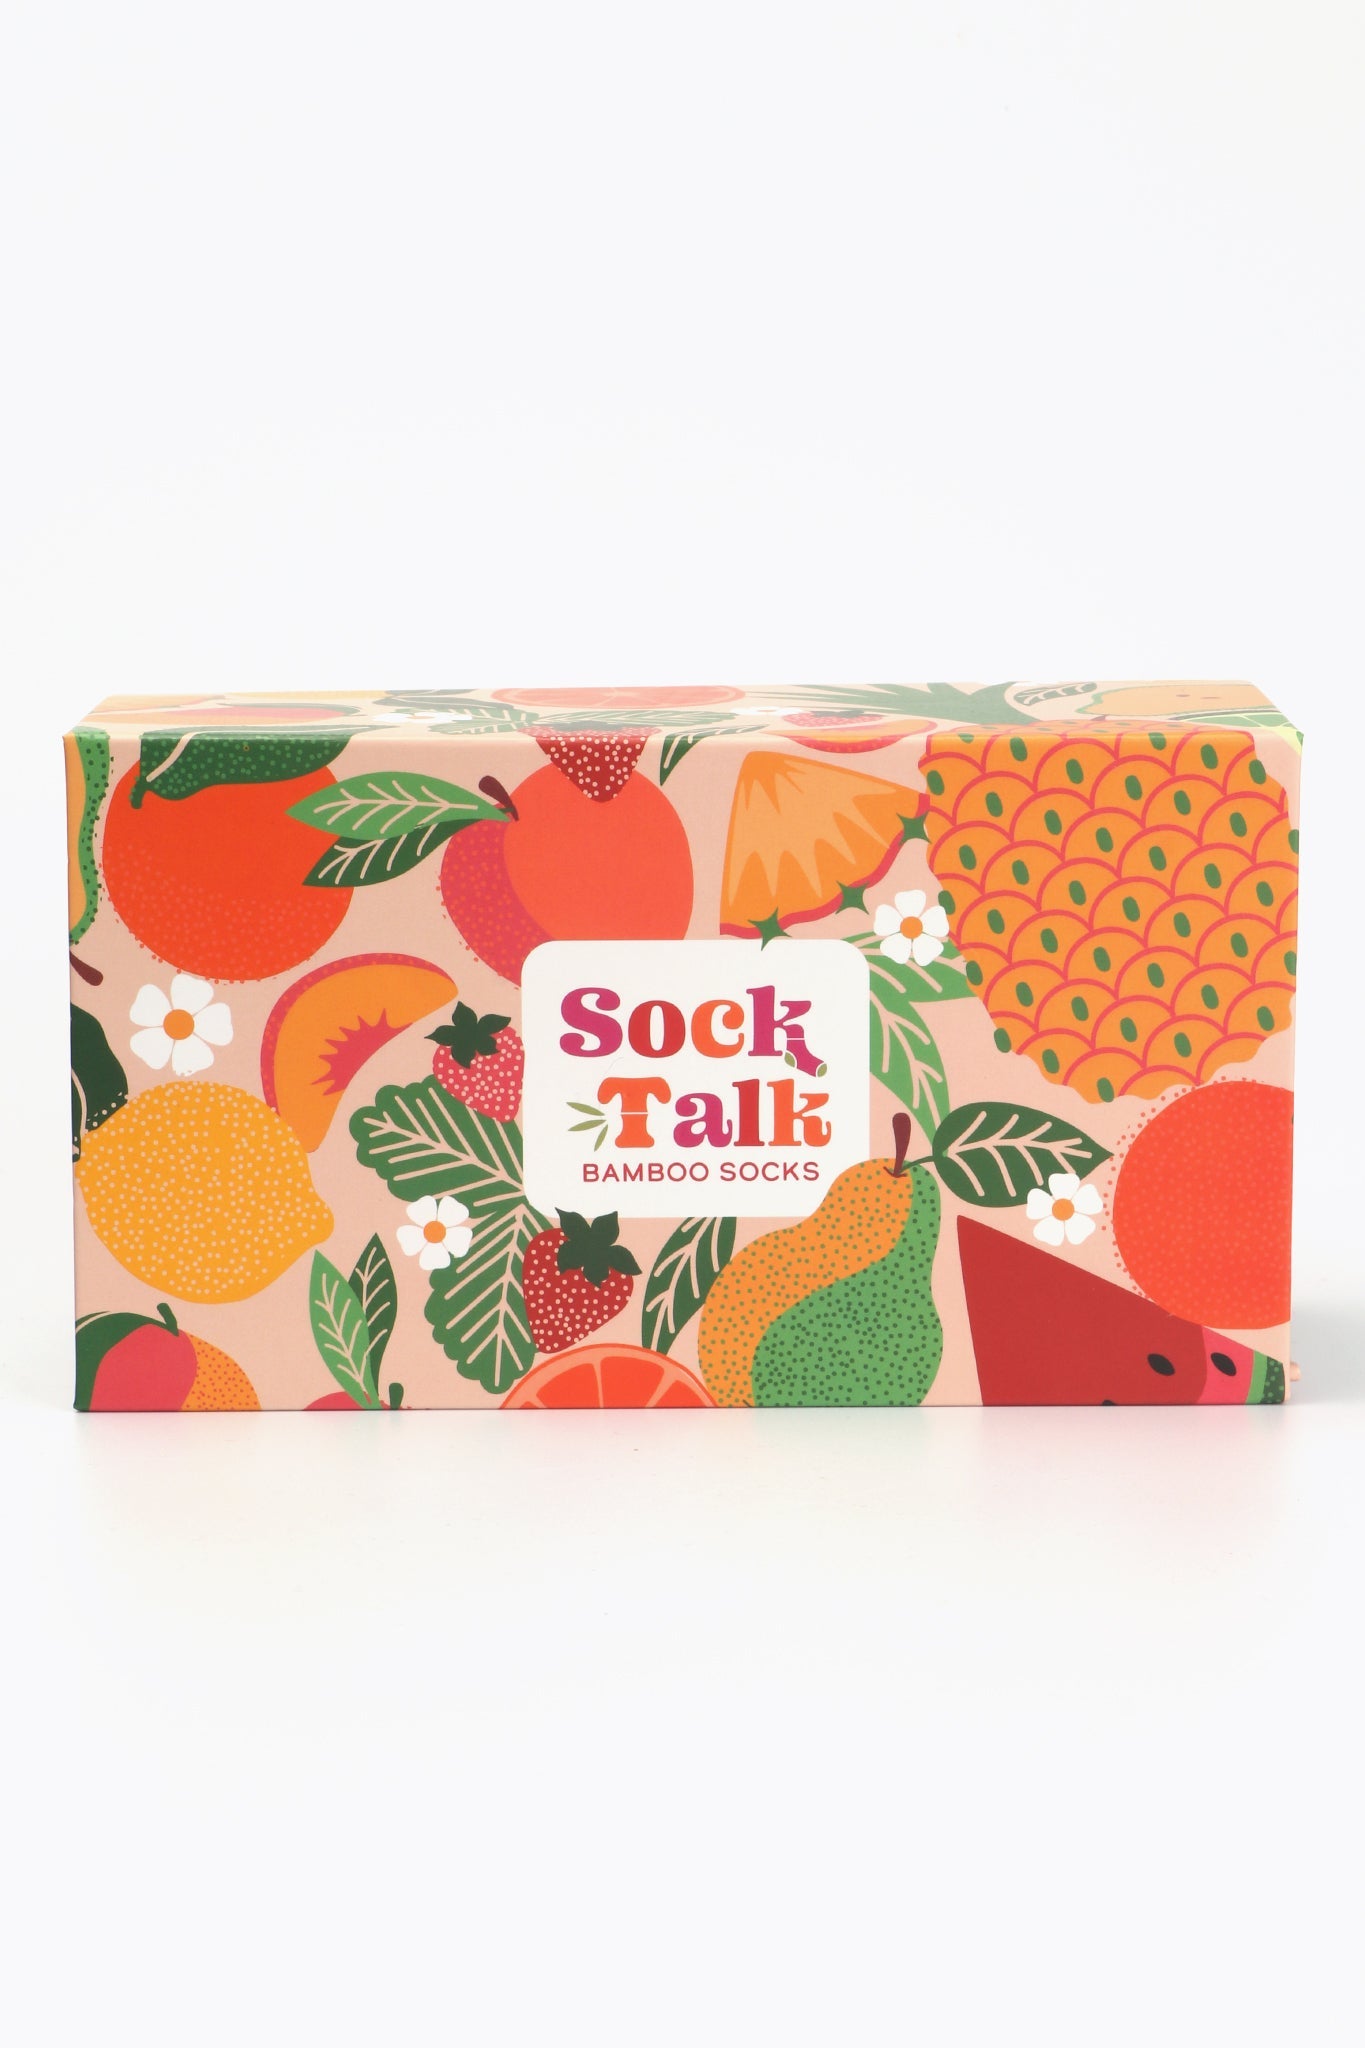 sock talk gift box with an all over fruit pattern design with pineapples, pears, peaches, strawberries and lemons